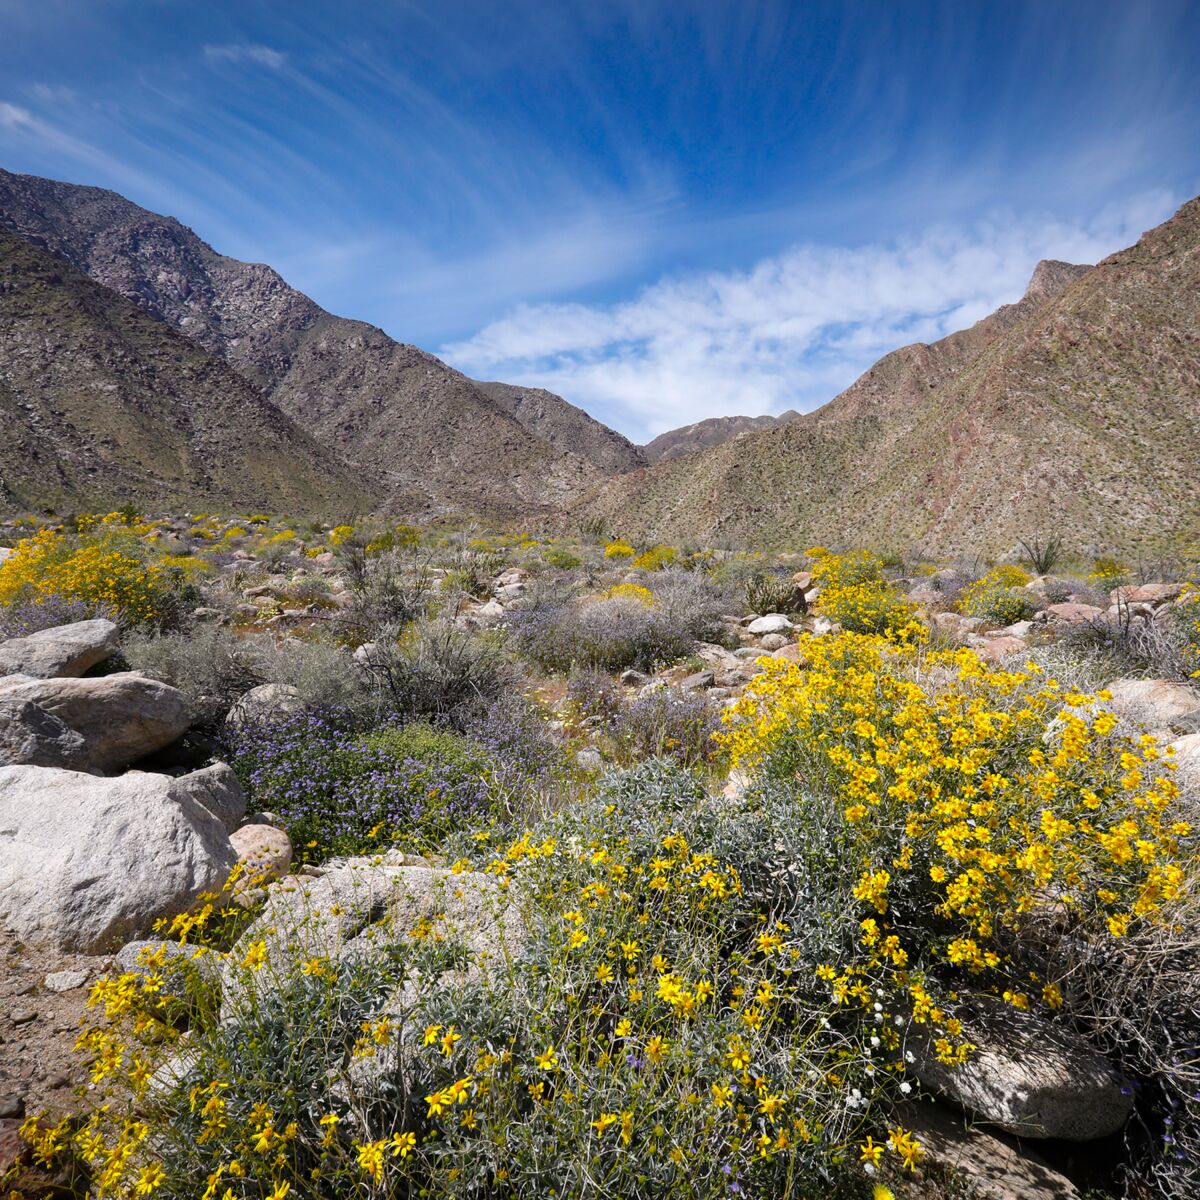 The Borrego Palm Canyon Trail in Anza-Borrego Desert State Park, shown here in 2019.